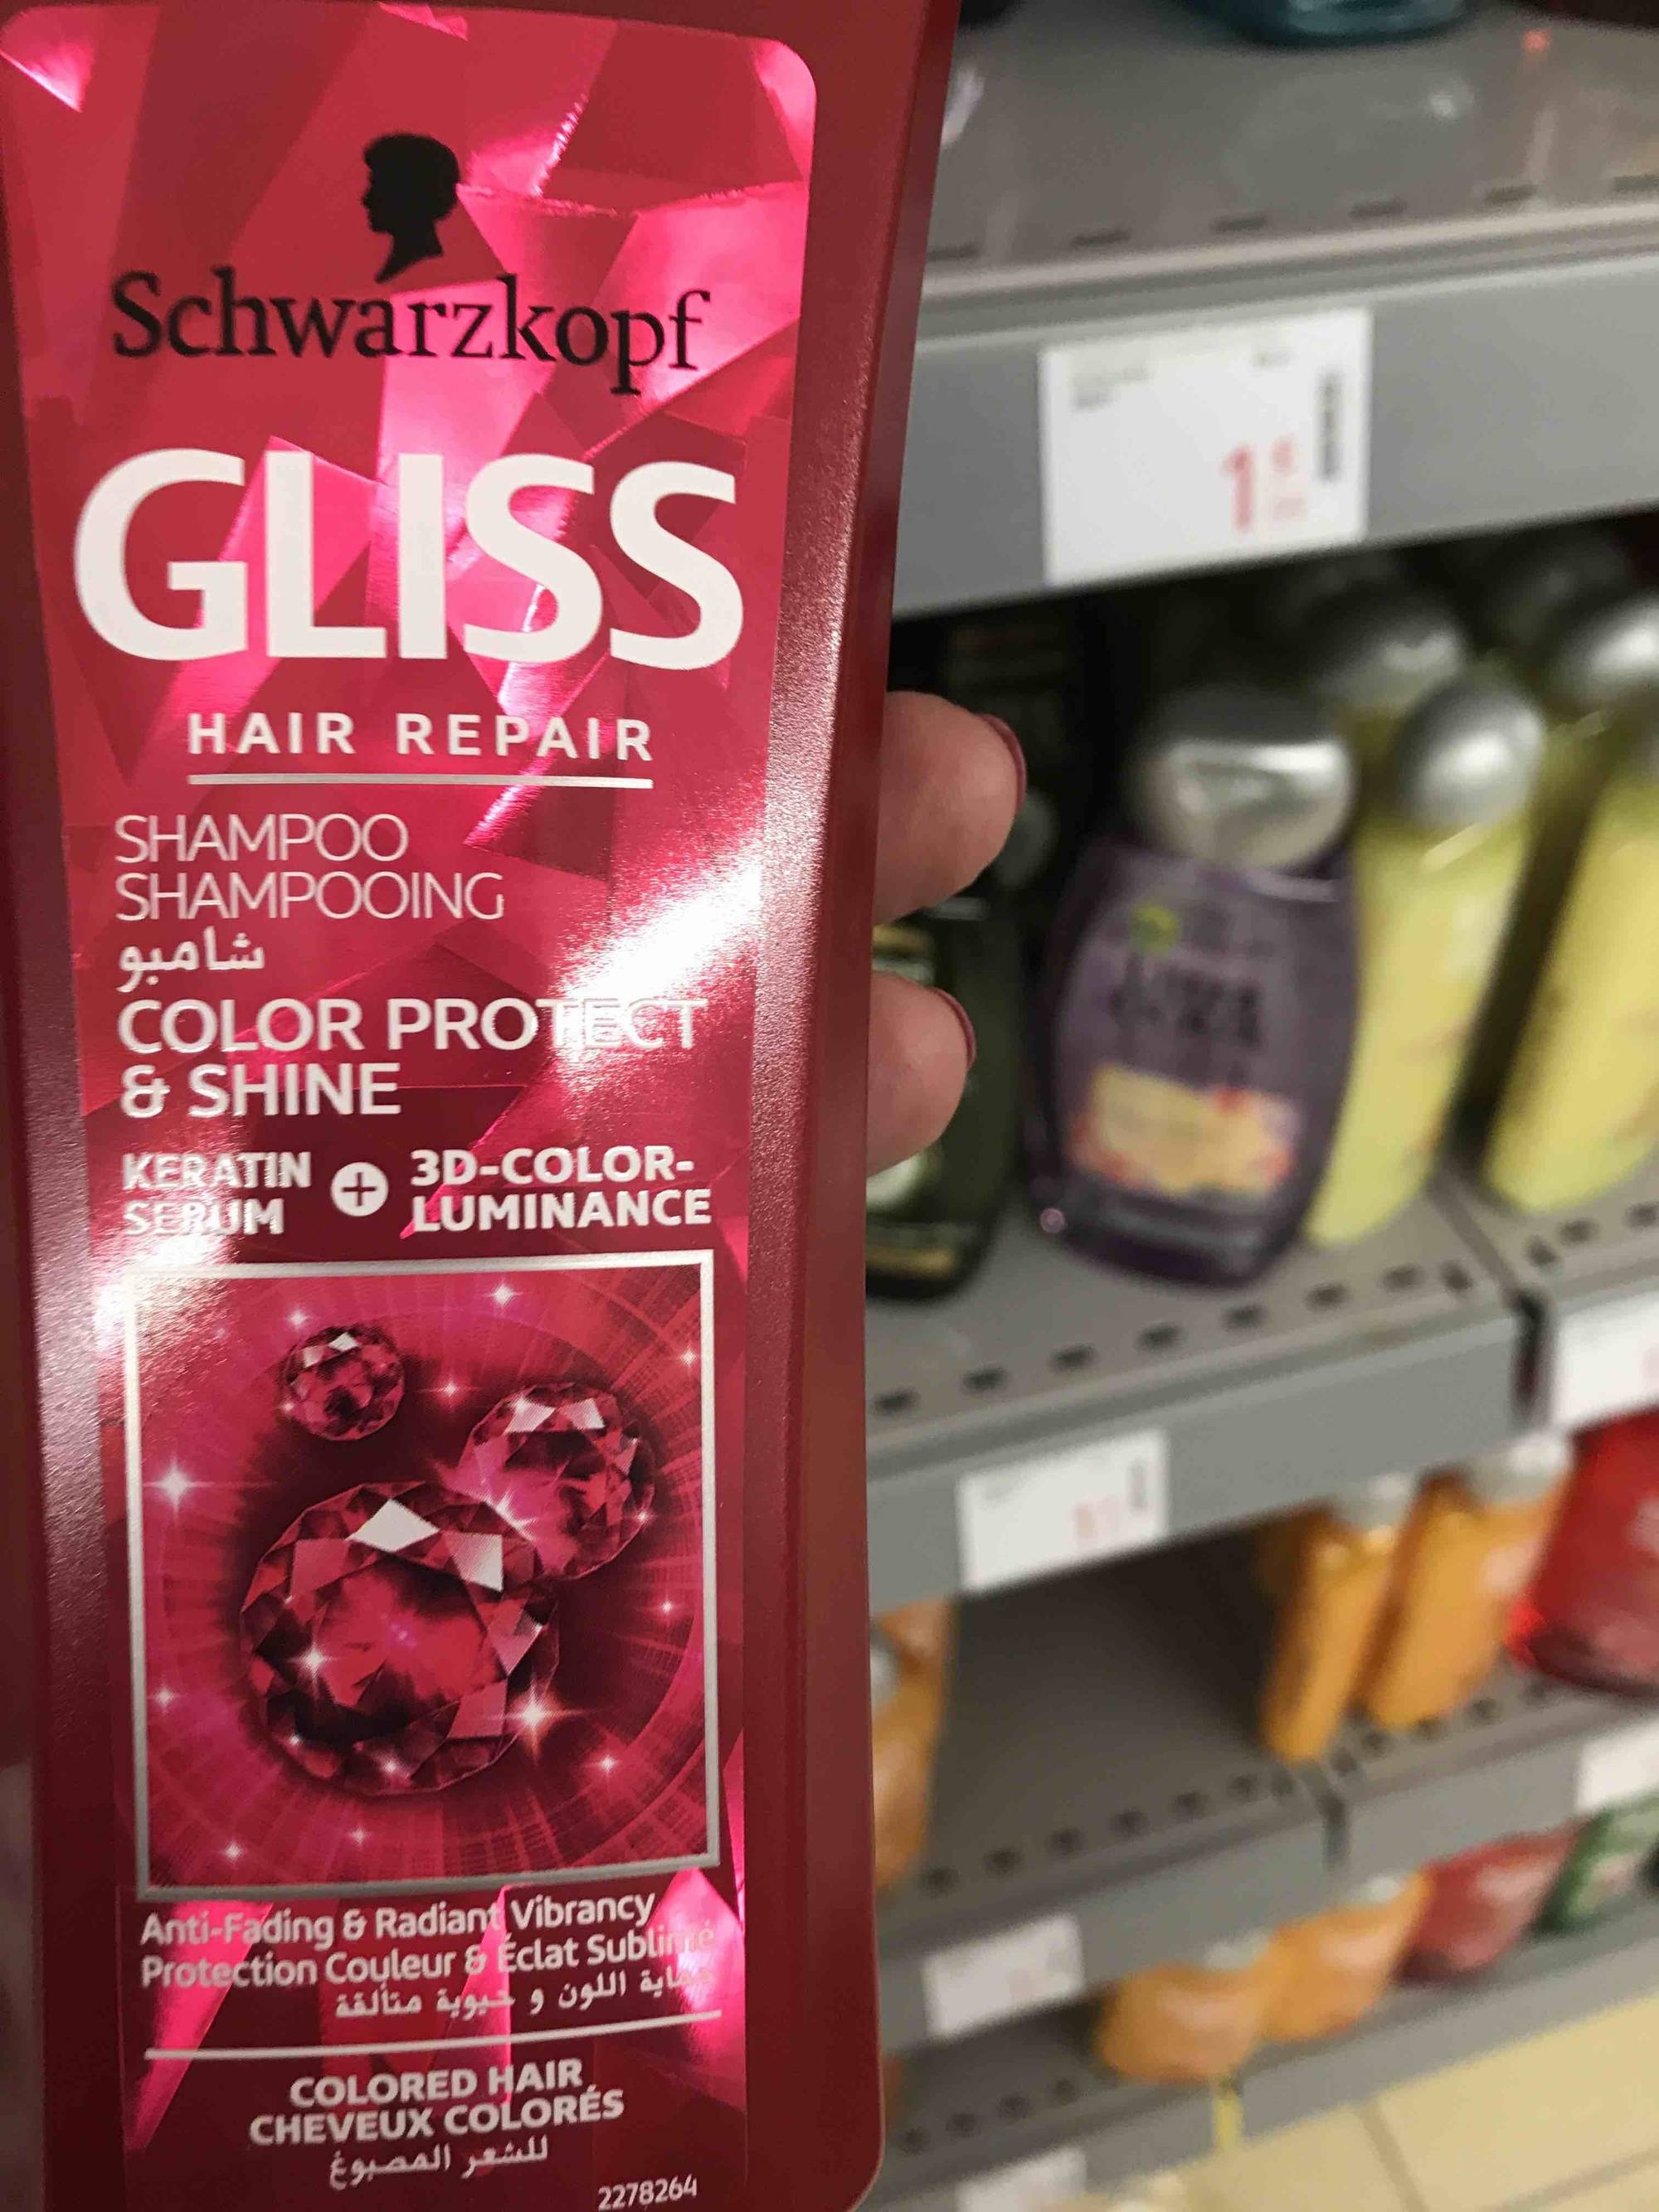 SCHWARZKOPF - Gliss hair repair - Shampooing color protect 